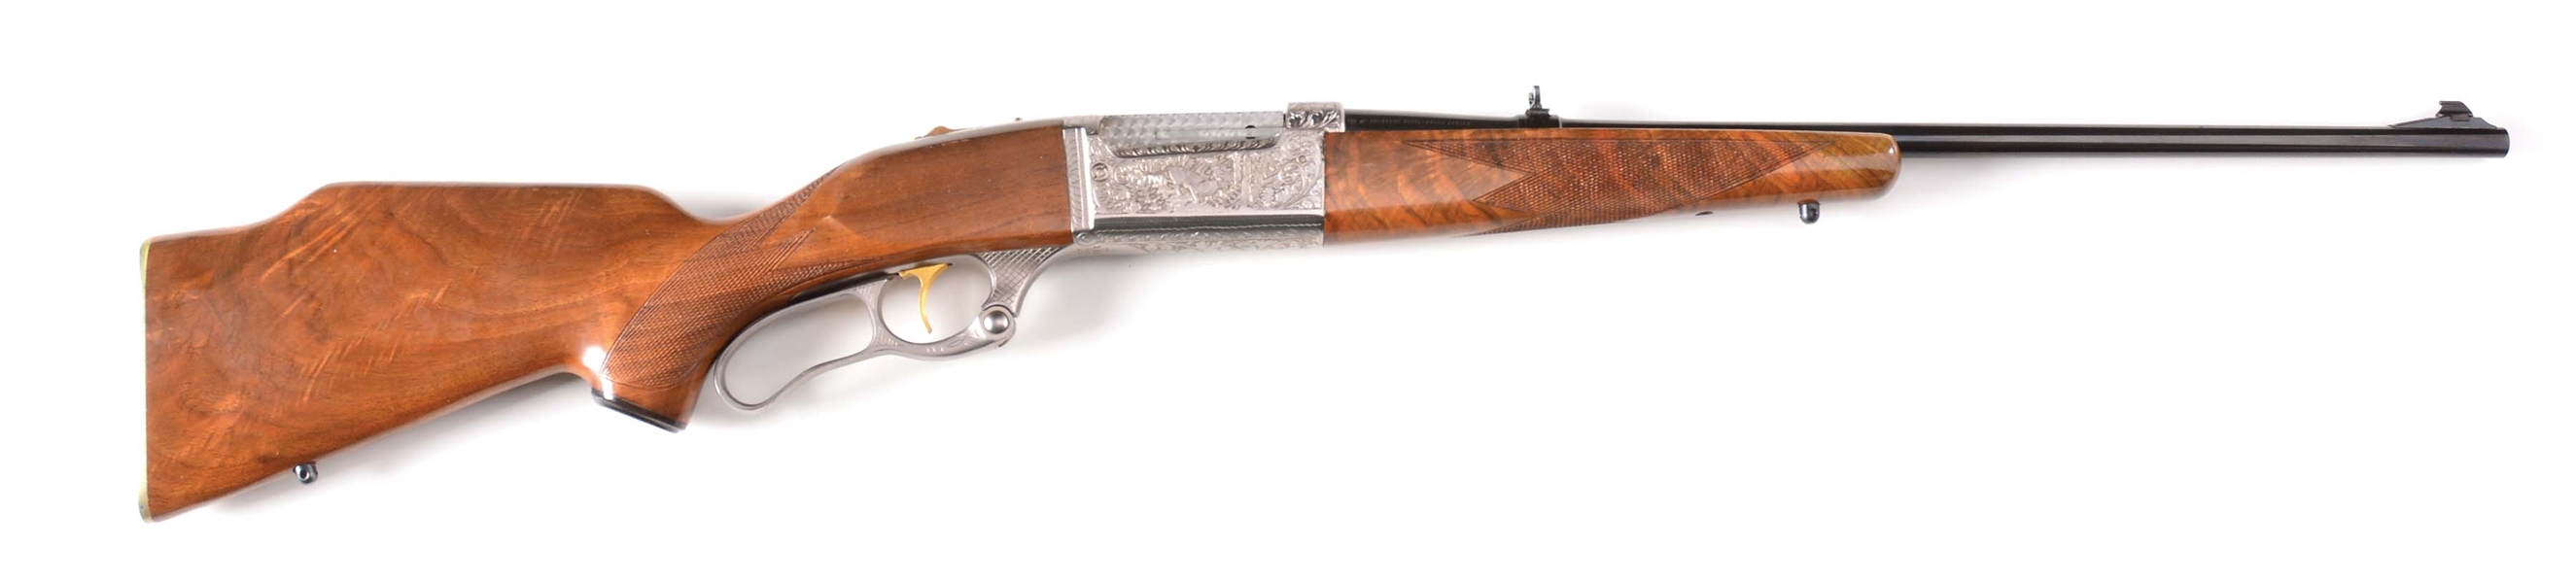 (M) FACTORY ENGRAVED SAVAGE MODEL 99M PE LEVER ACTION RIFLE.